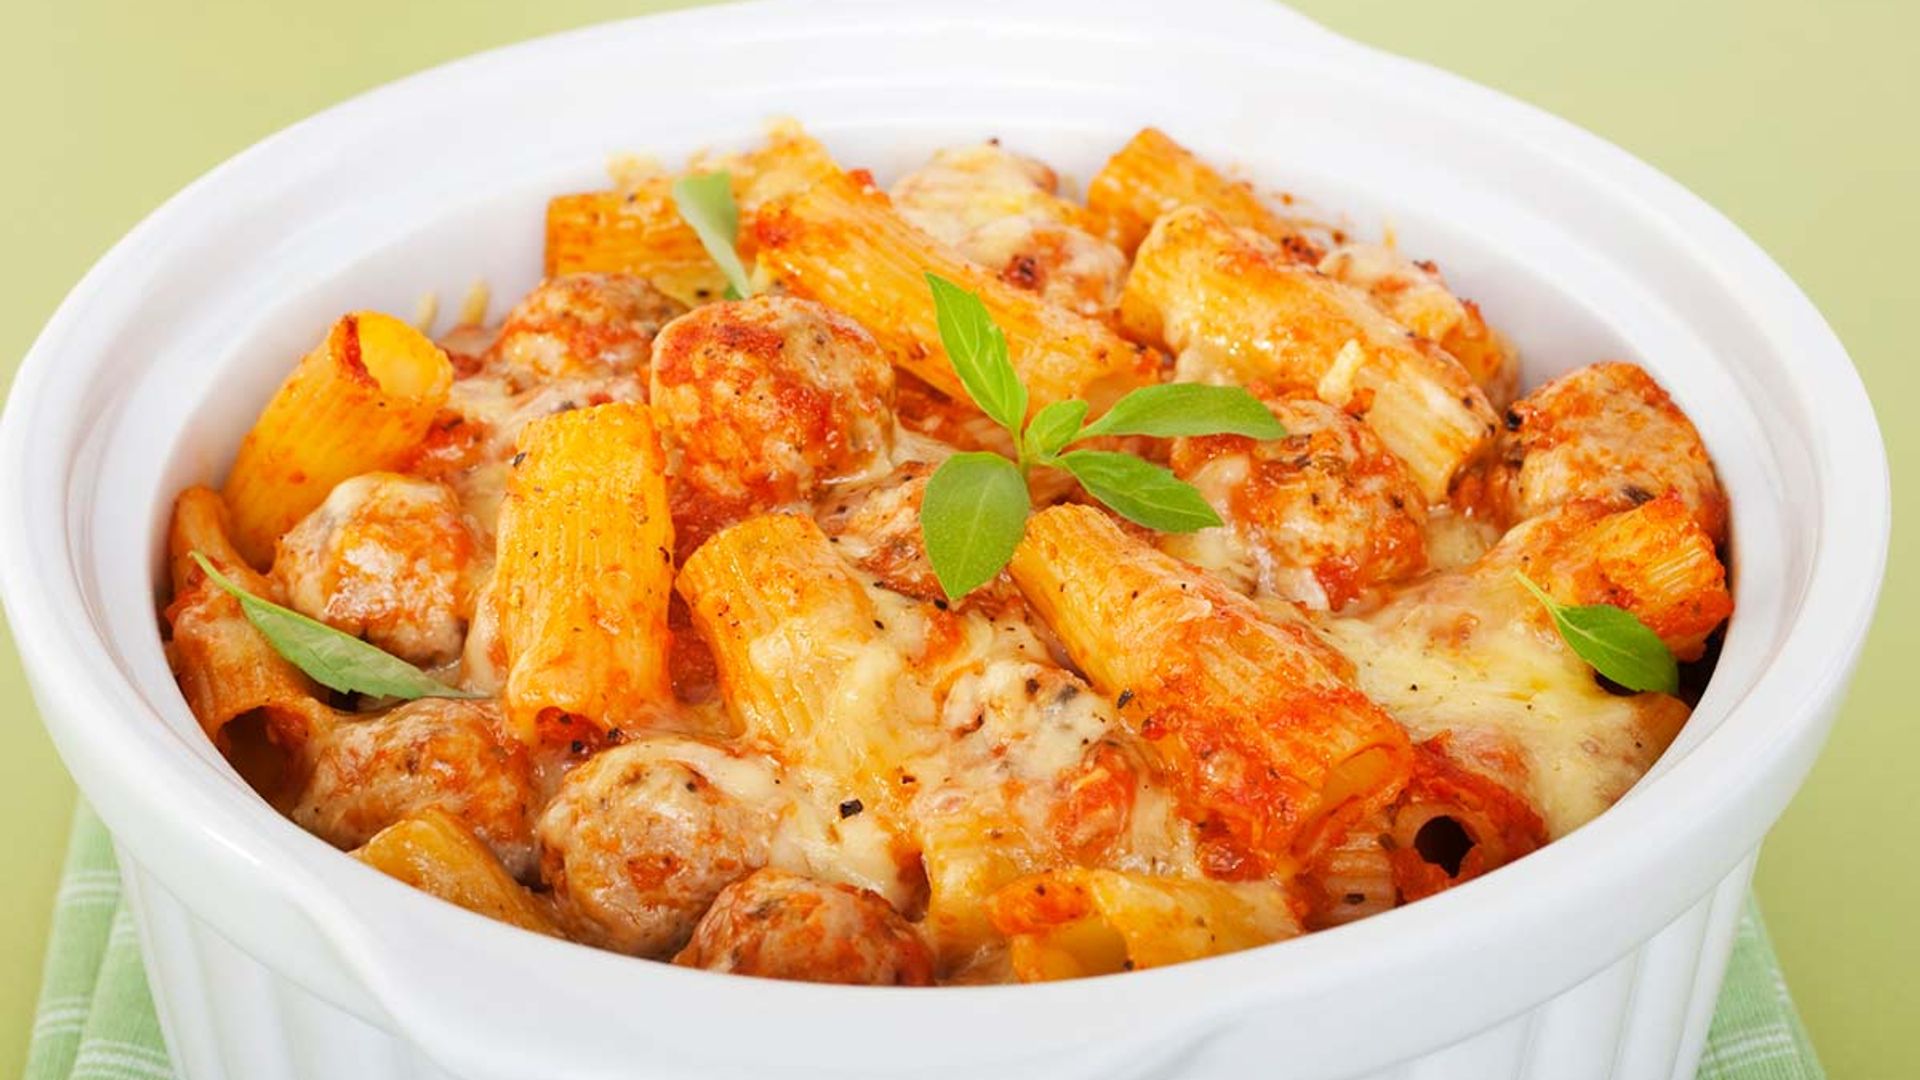 We've found the ultimate cheesy pasta bake recipe - and it couldn't be easier